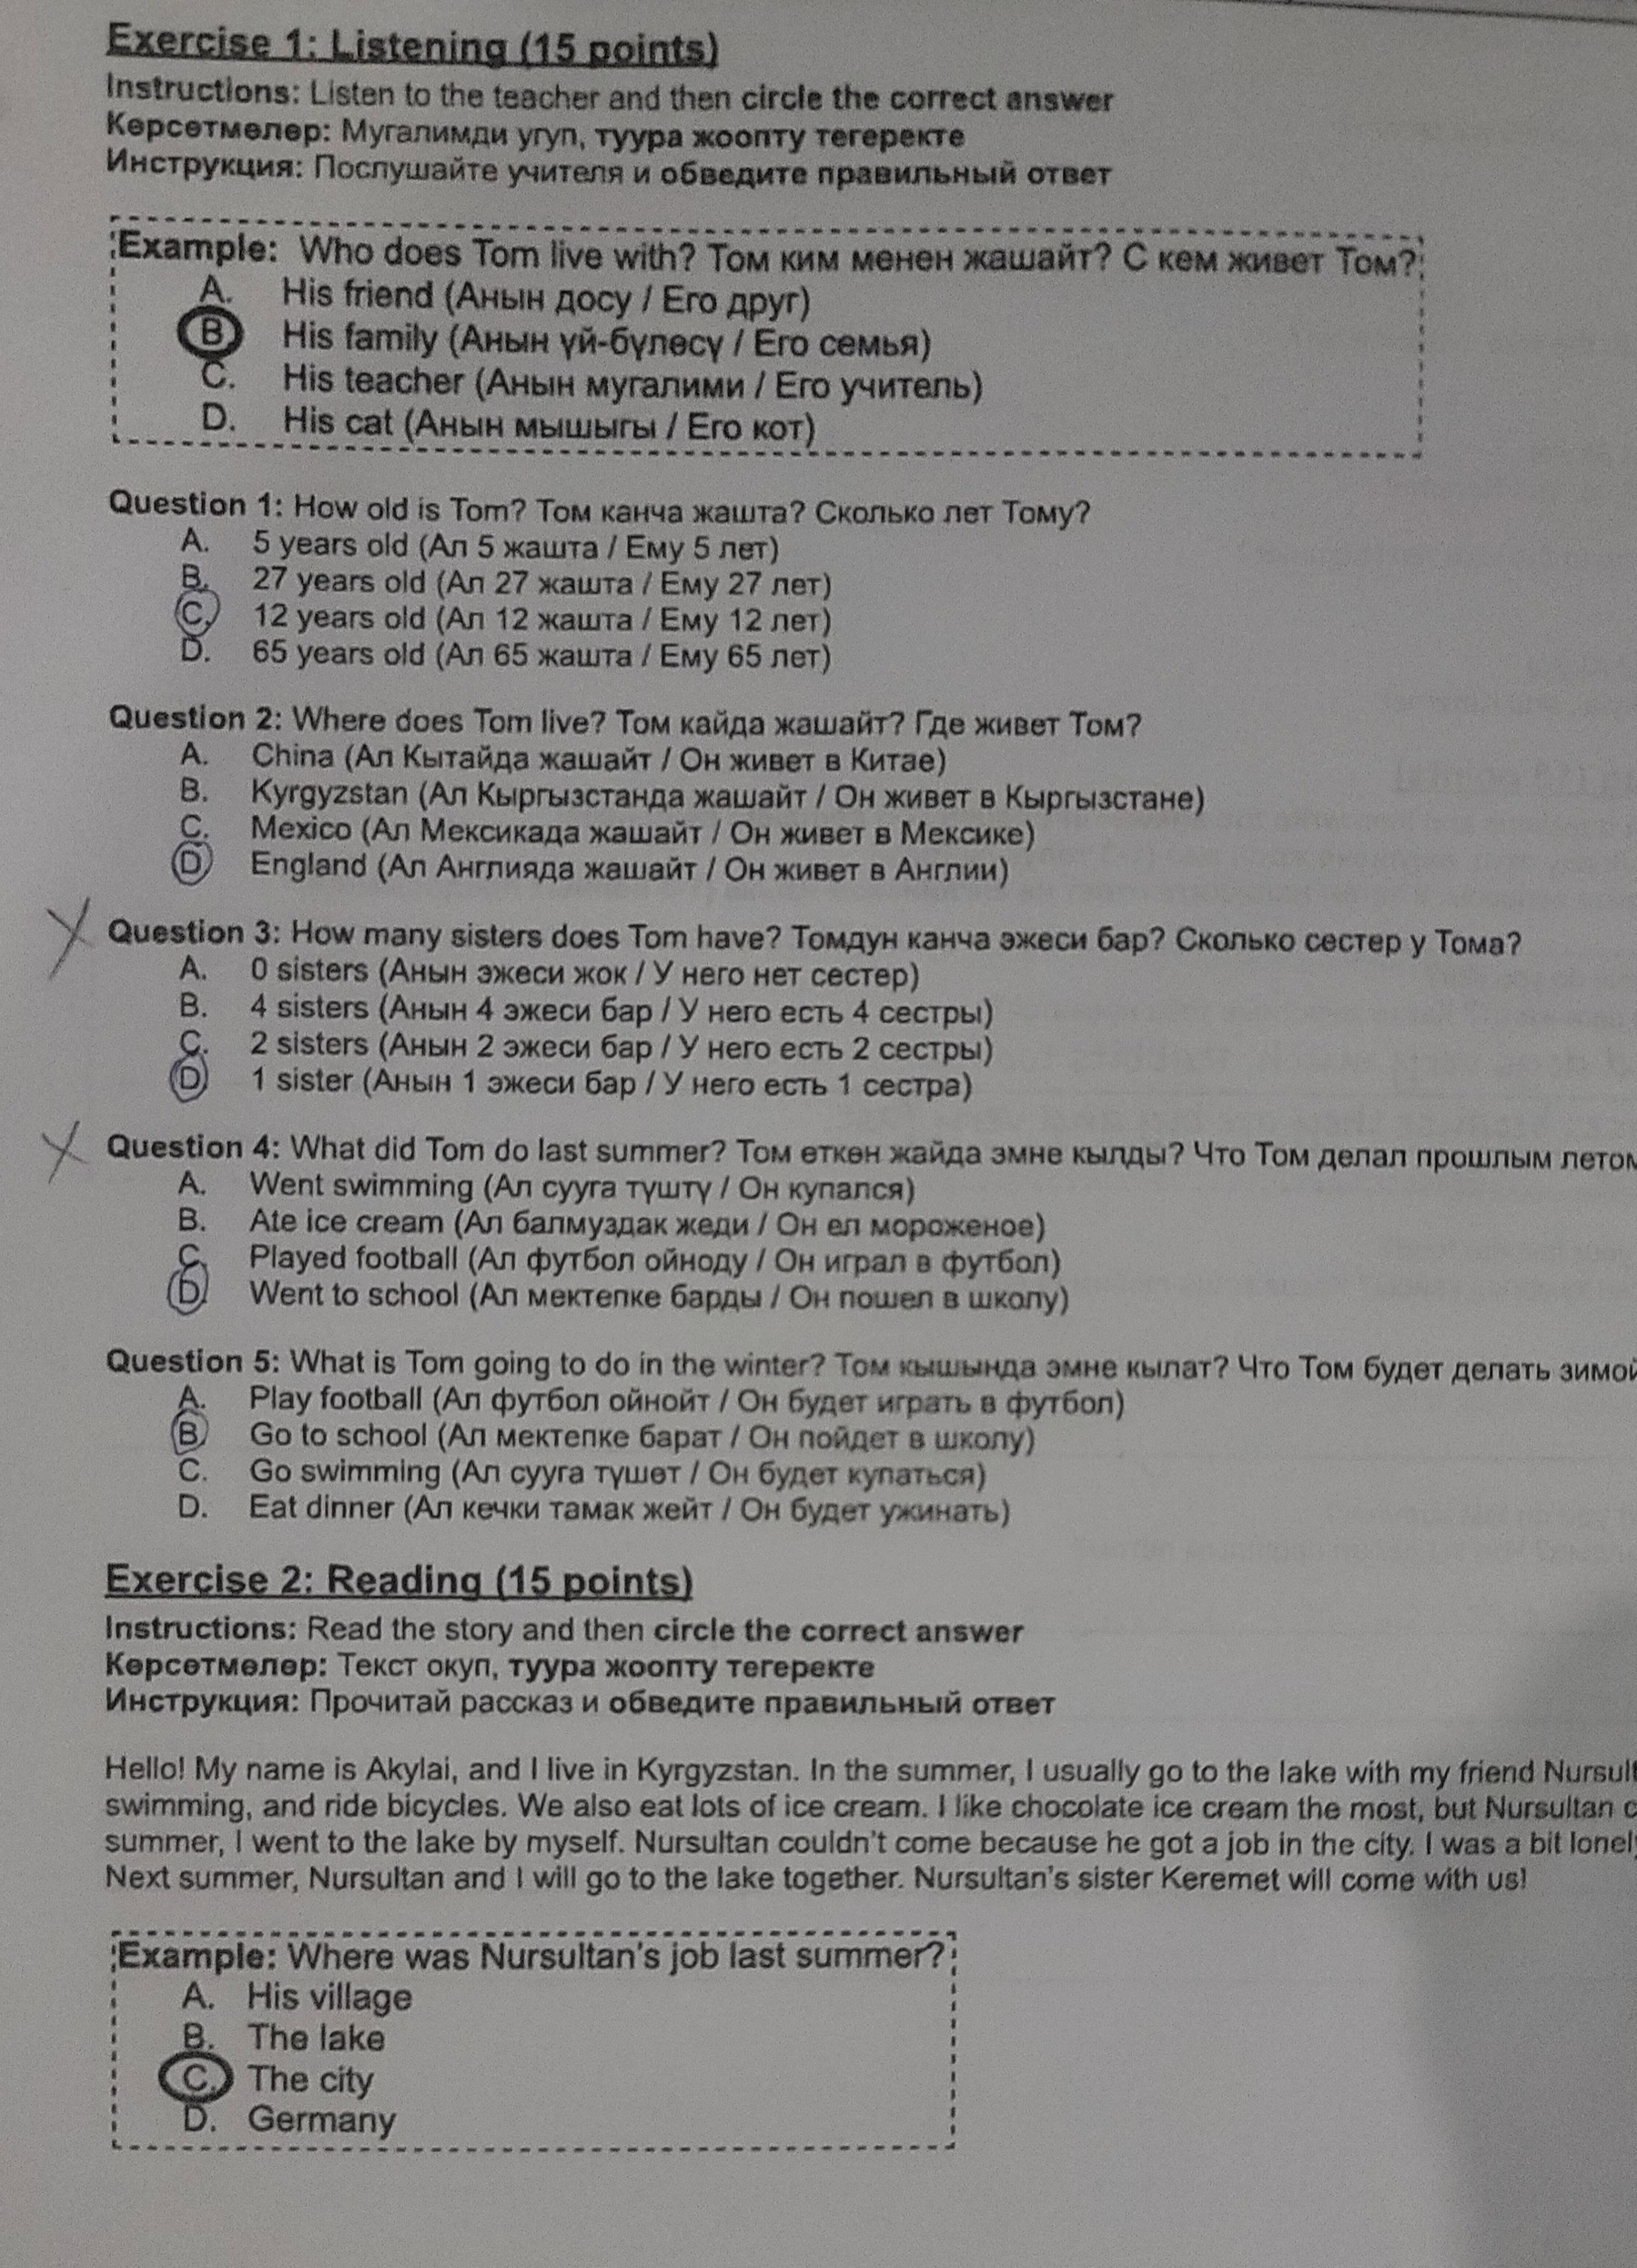 5 multiple choice listening questions and a reading section with a text underneath. test primarily in English but also instructions in Kyrgyz and Russian